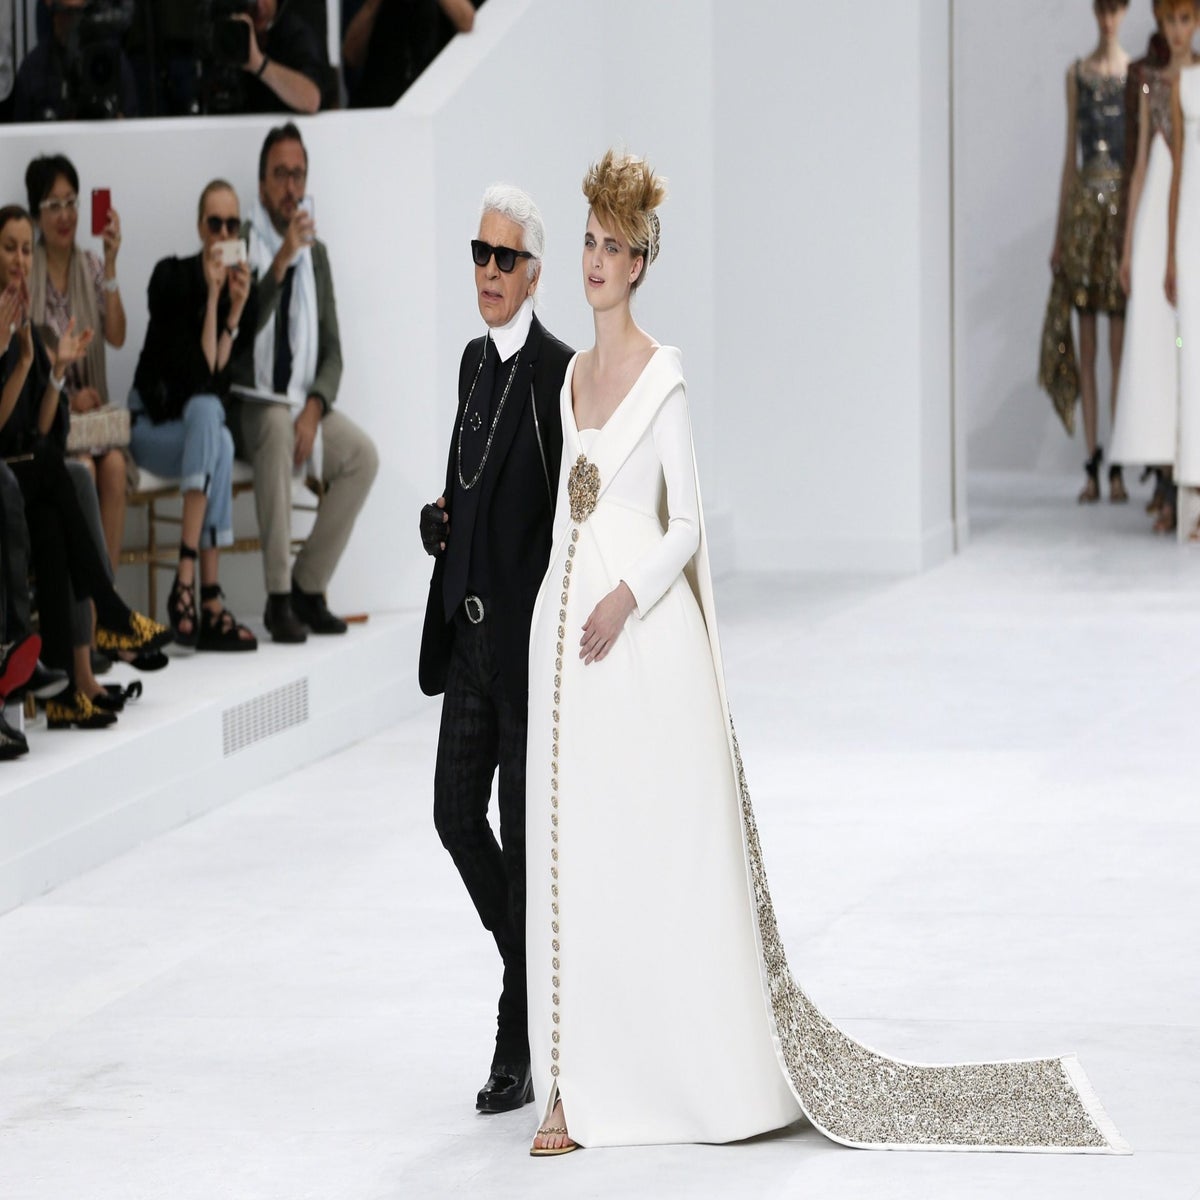 Karl & Coco. How Lagerfeld shaped Chanel